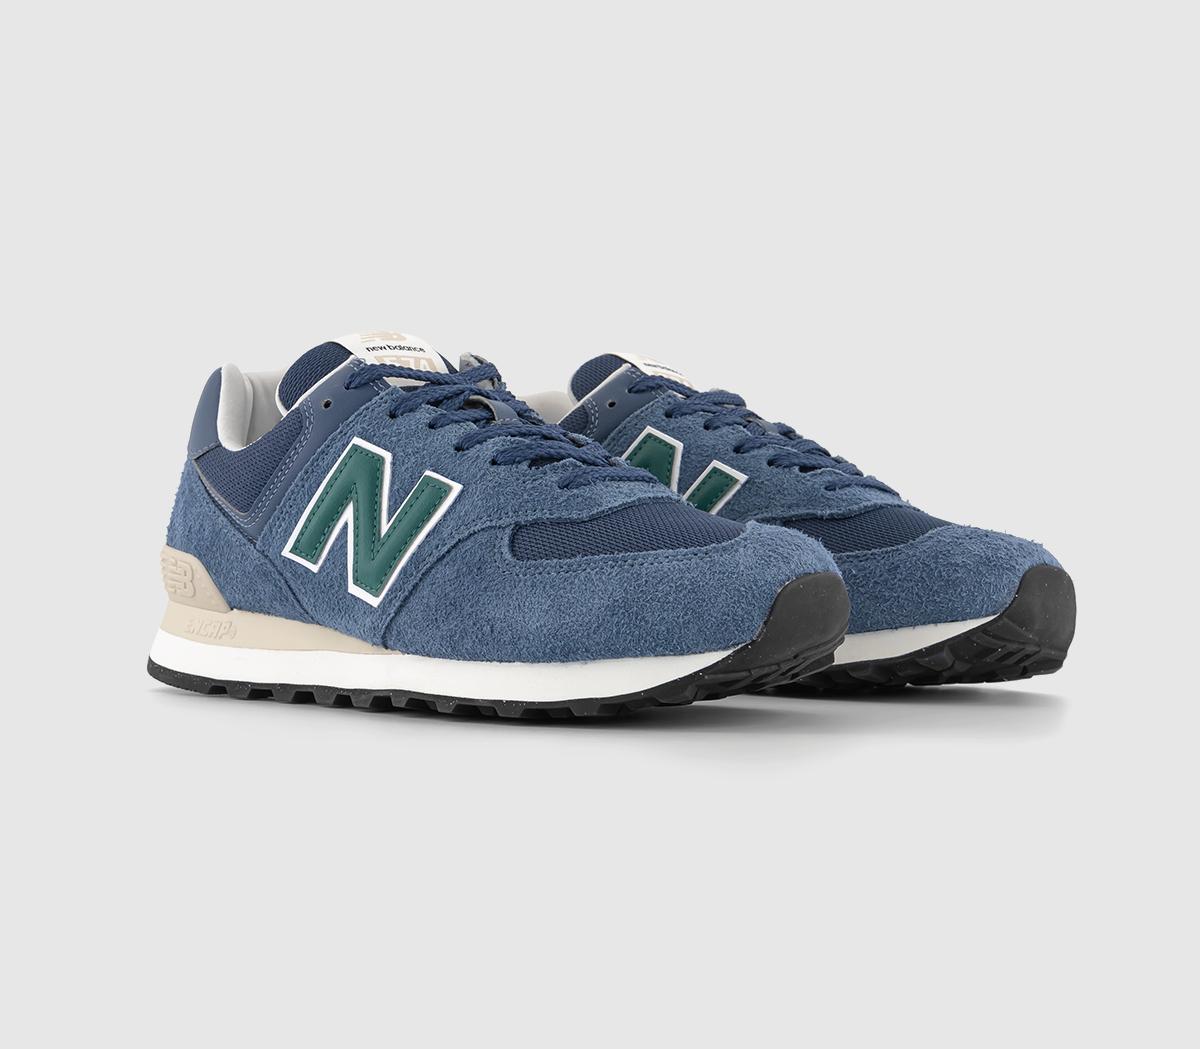 New Balance 574 Trainers Blue Navy Green, 7.5